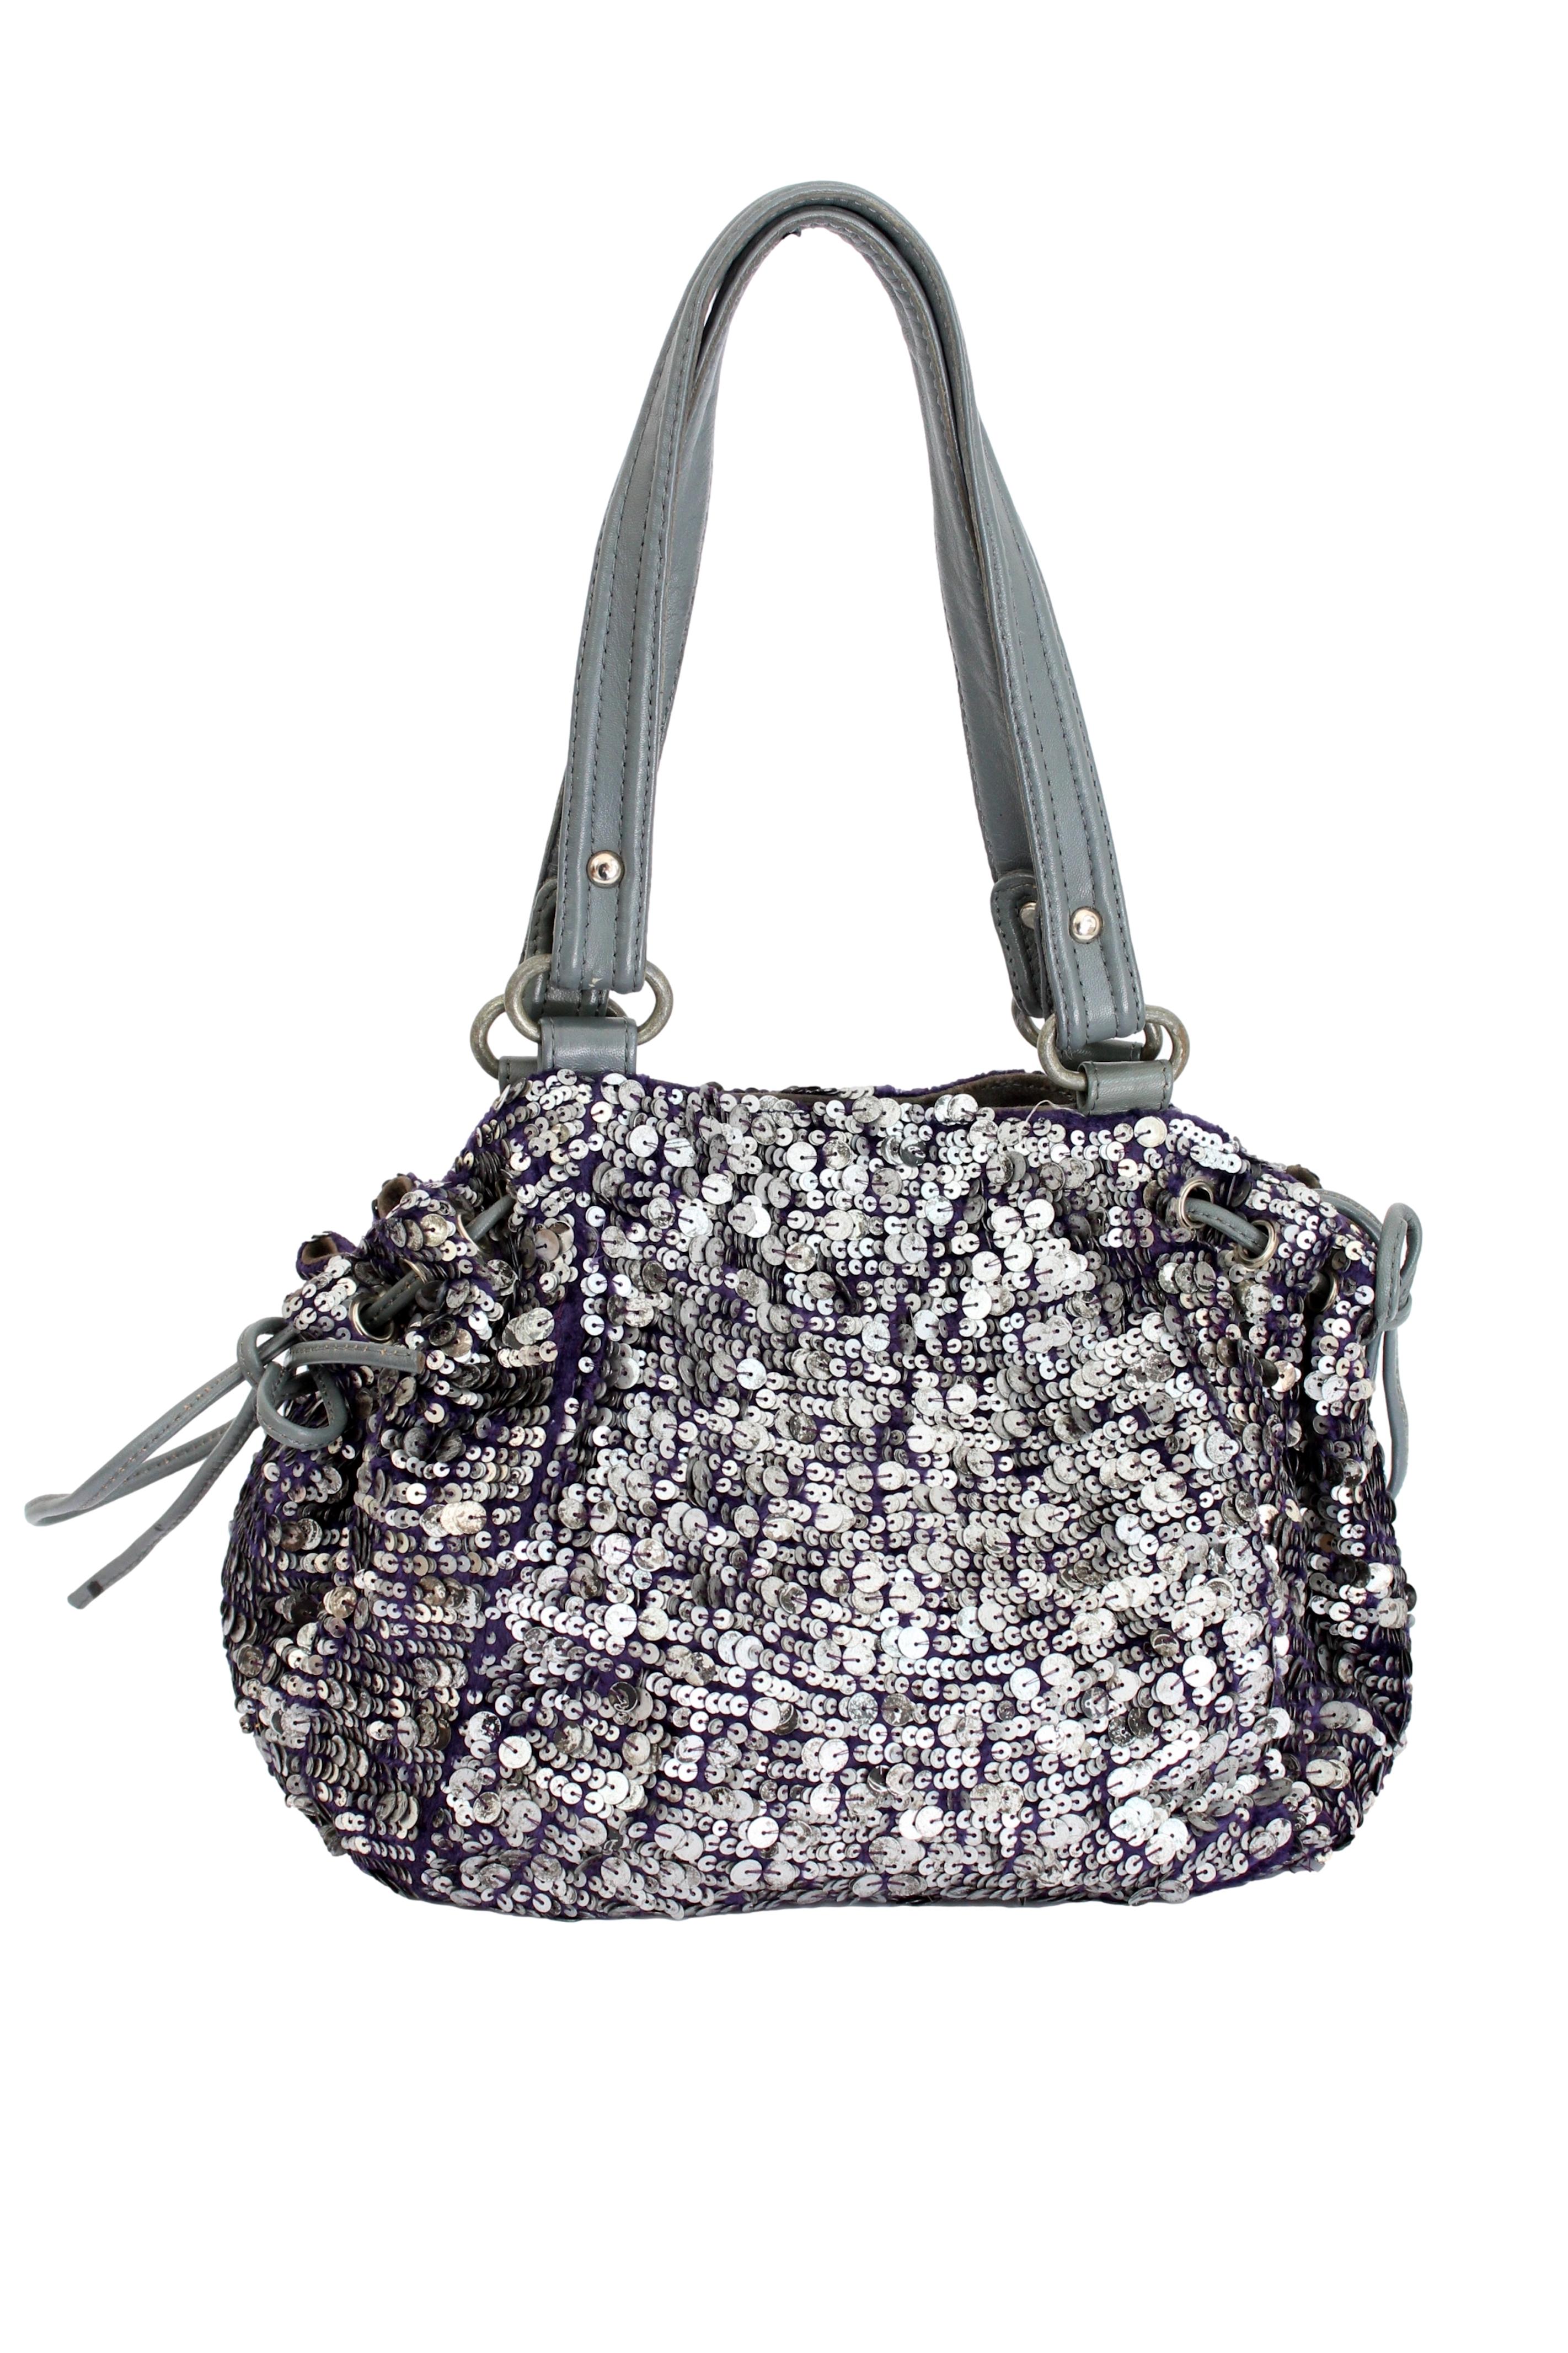 Antik Batik vintage bag 2000s. Handbag, completely covered with silver colored sequins. Handles and parts of the closure in gray, 100% leather fabric. Internally lined in 100% cotton, there are small pockets with zippers. Clip button closure. Made